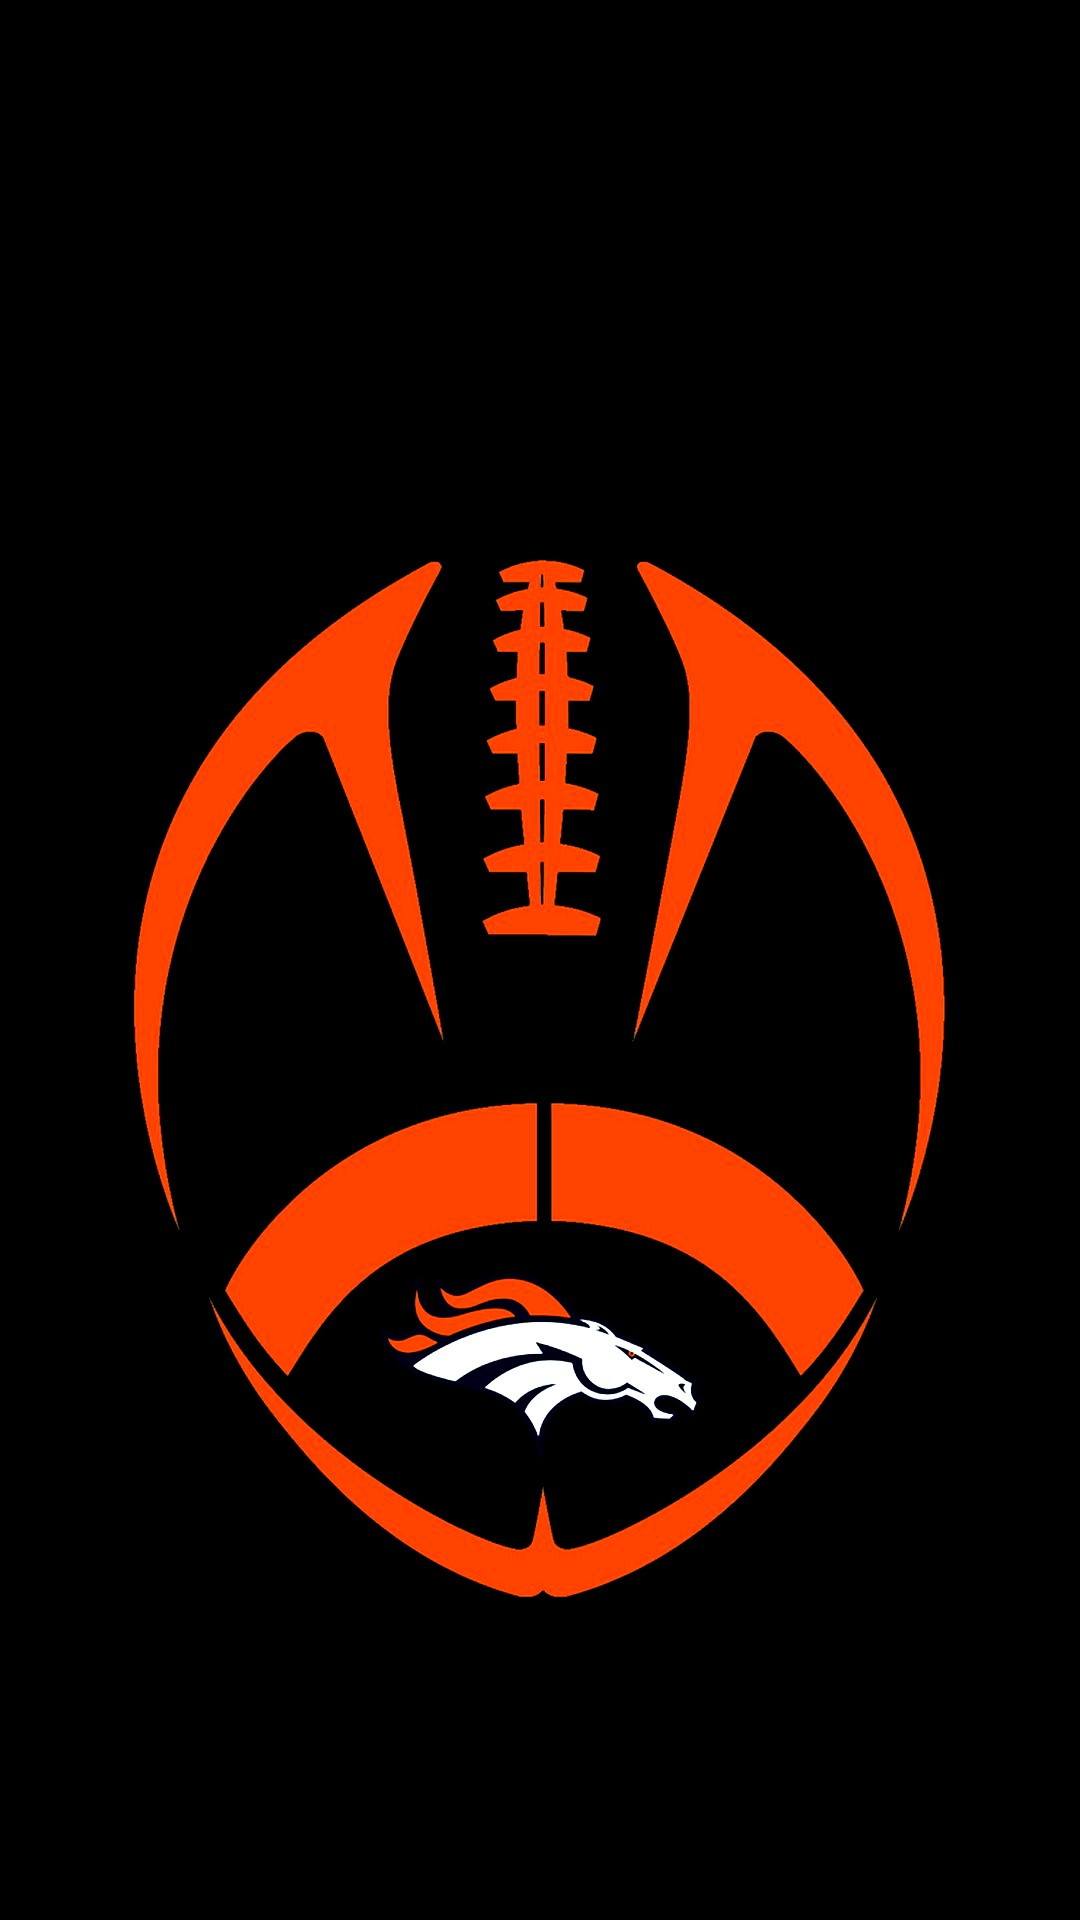 Denver Broncos Mobile Wallpapers With high-resolution 1080X1920 pixel. You can use this wallpaper for your Mac or Windows Desktop Background, iPhone, Android or Tablet and another Smartphone device